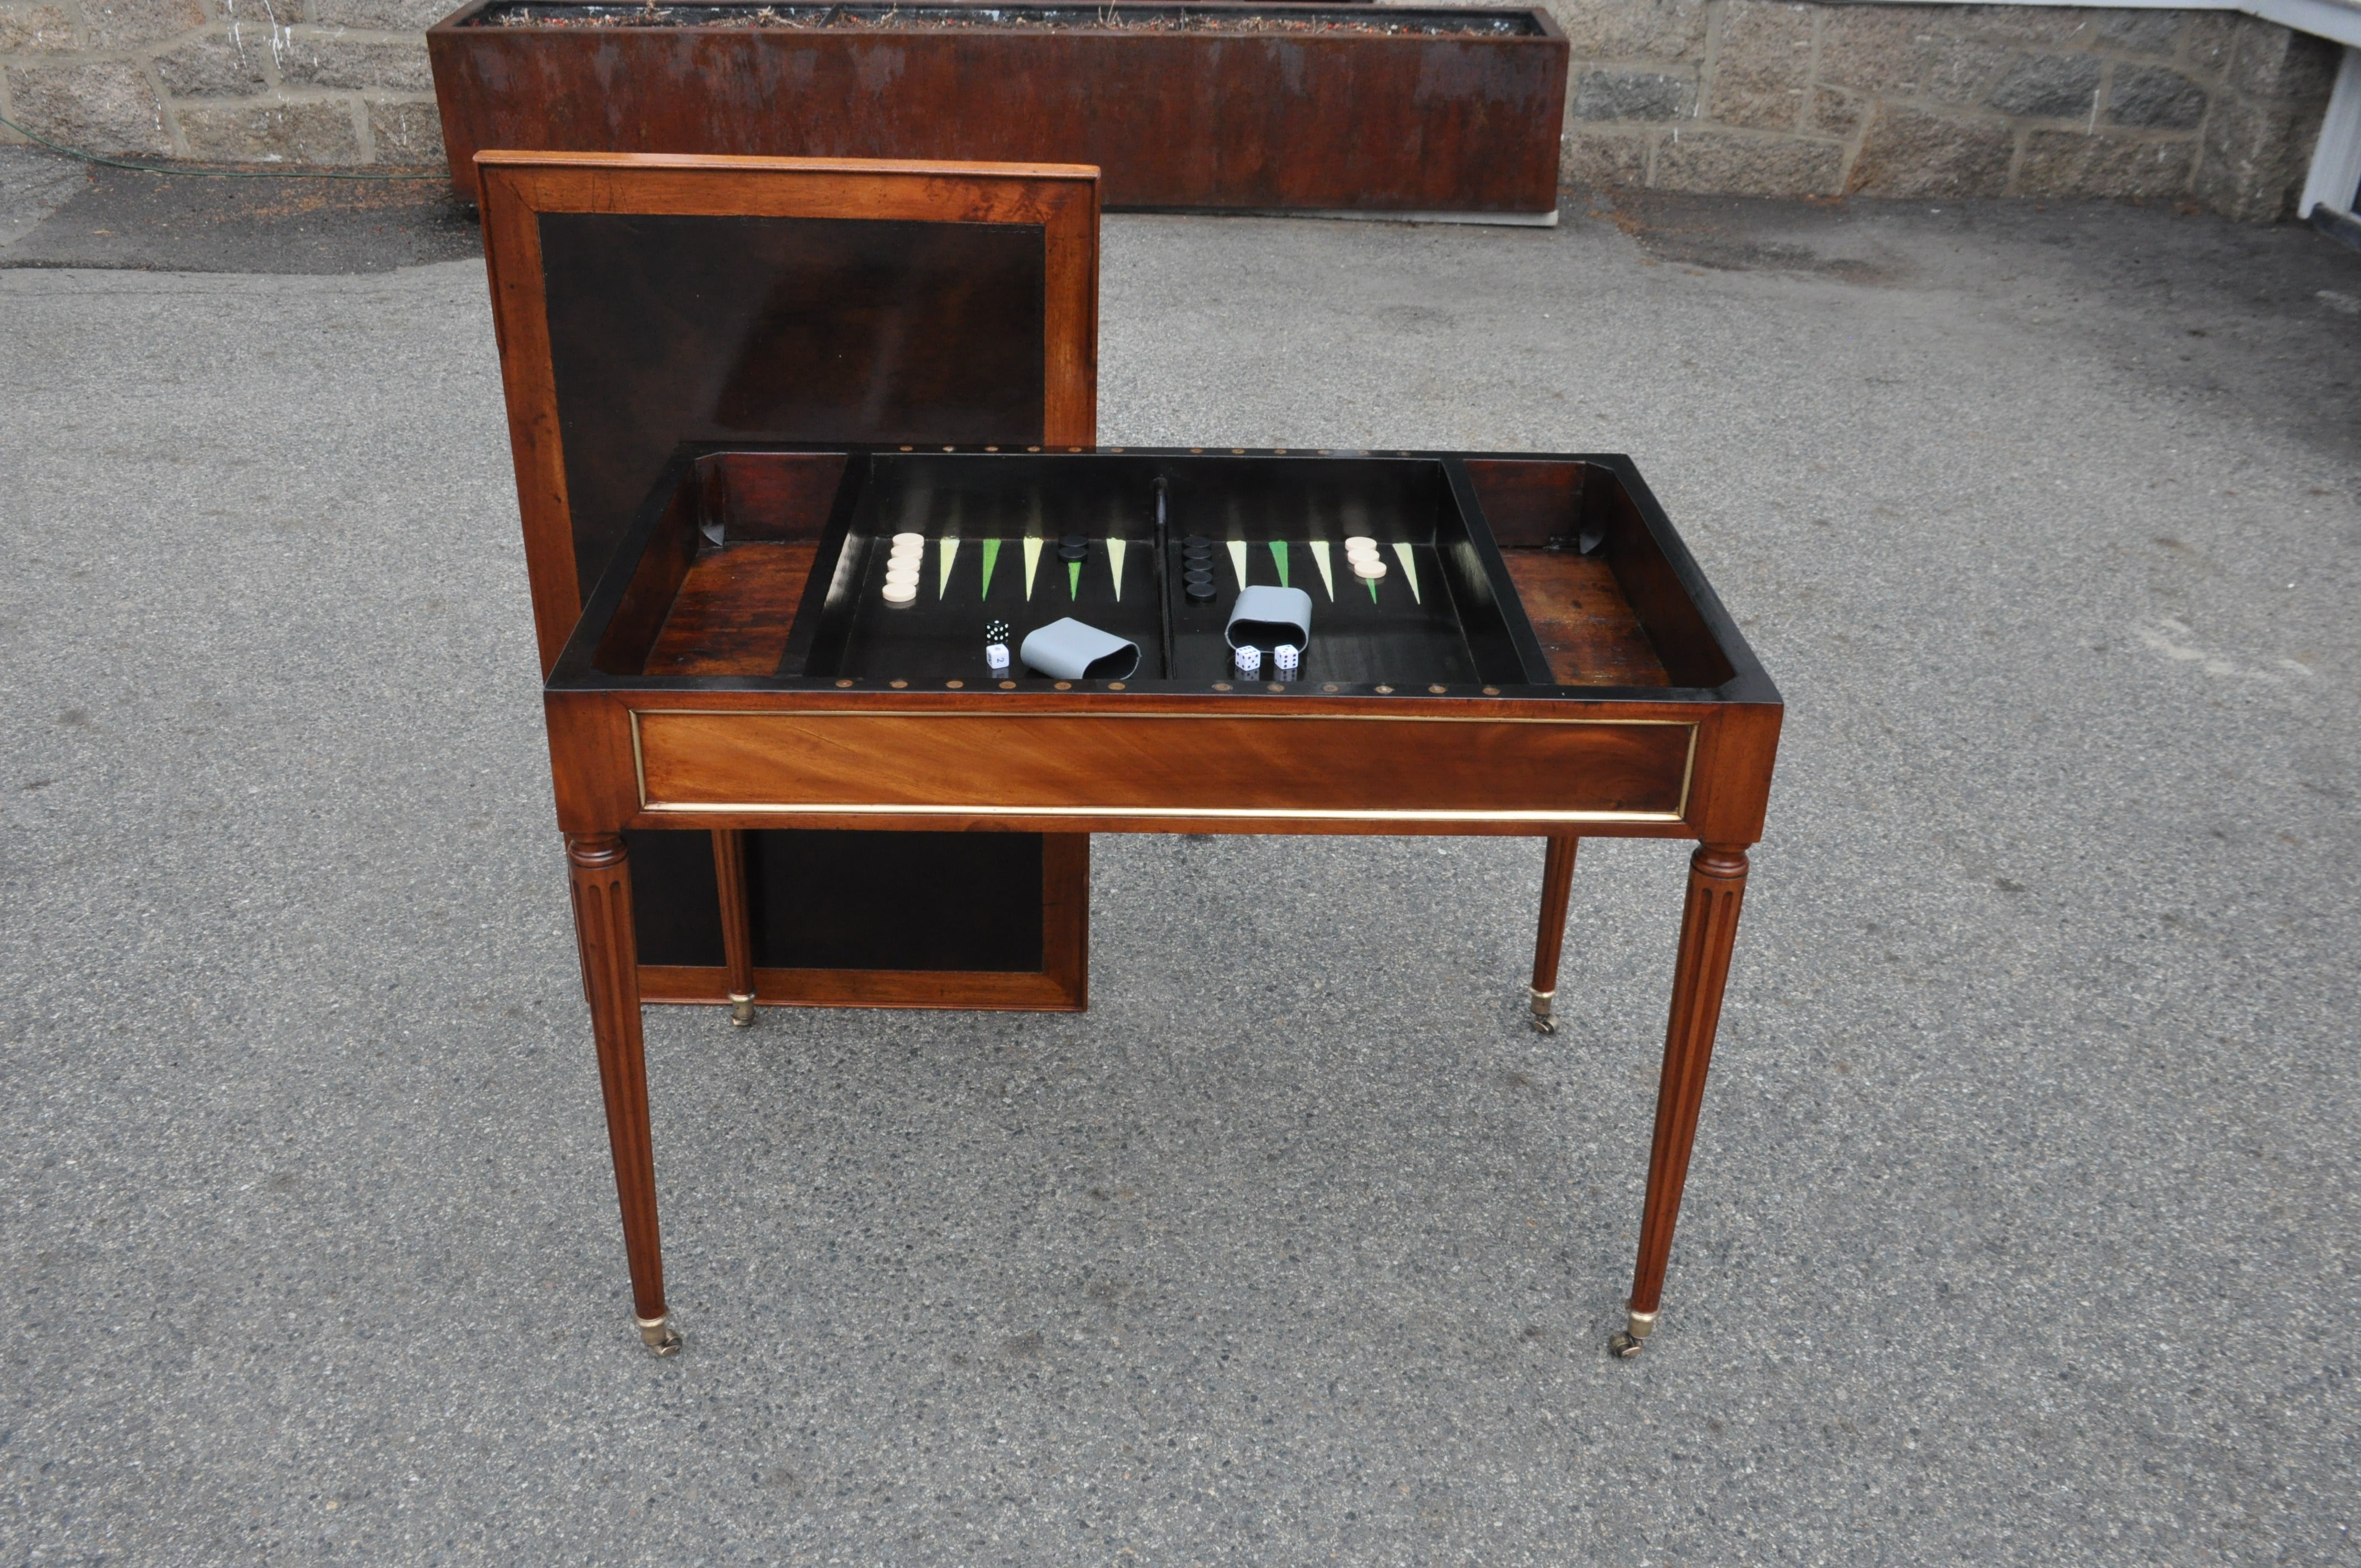 Period Late 18th Century Louis XVI Mahogany Brass Banded Tric-trac or Backgammon Table. Original Top that is Leather Fitted for Writing and Flips for a Felted Card Play. Provincial Well with Painted Backgammon Board Inside.